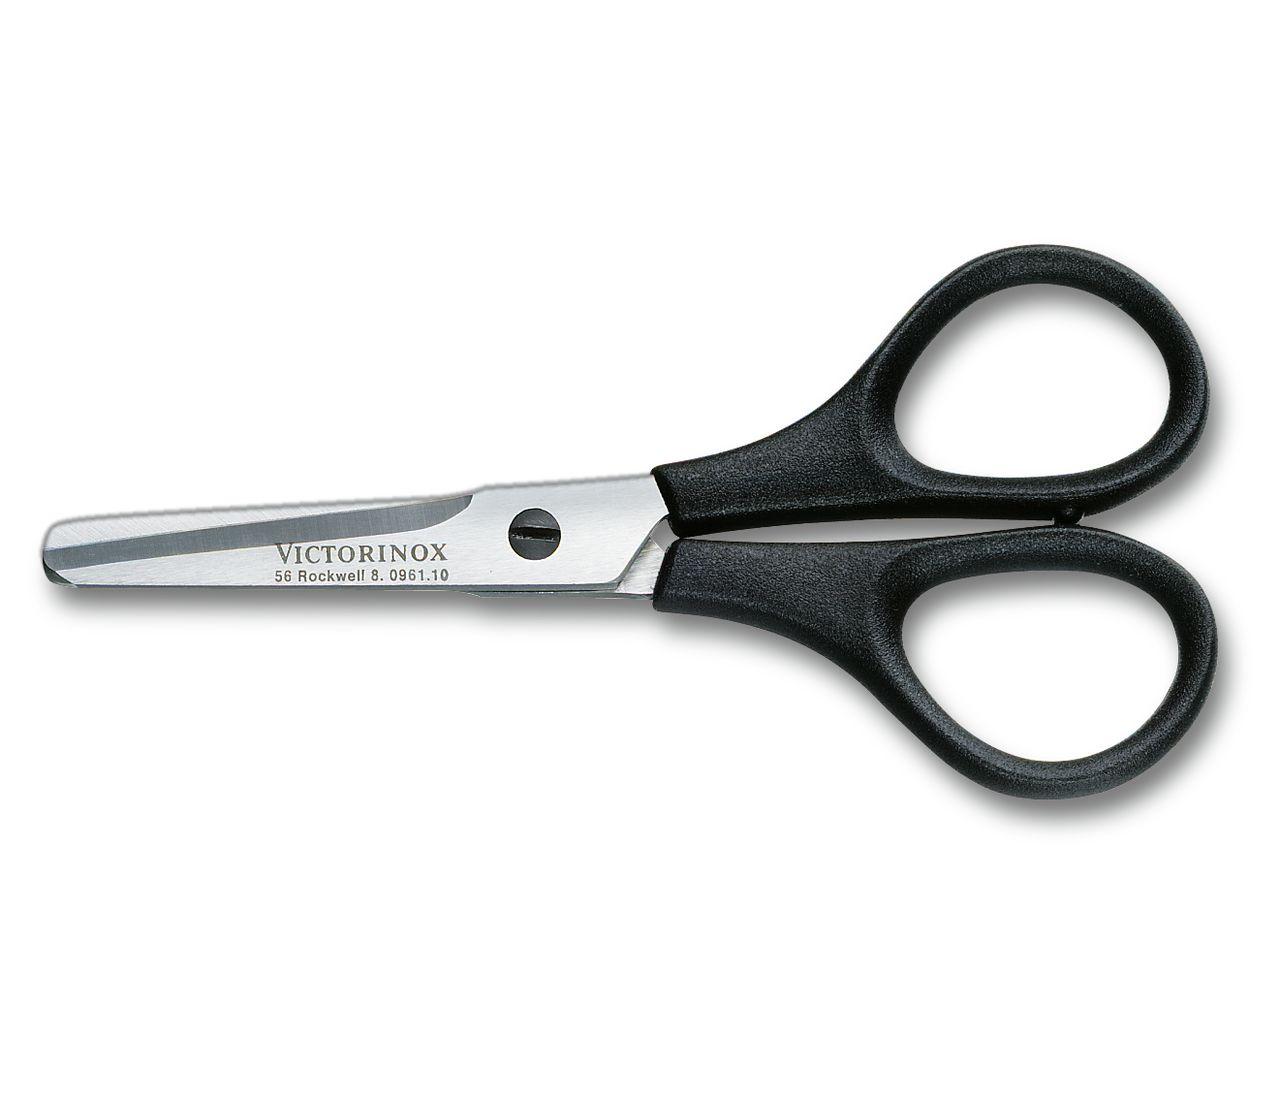 Pocket Scissors, NSN 5110-01-241-4376 - The ArmyProperty Store